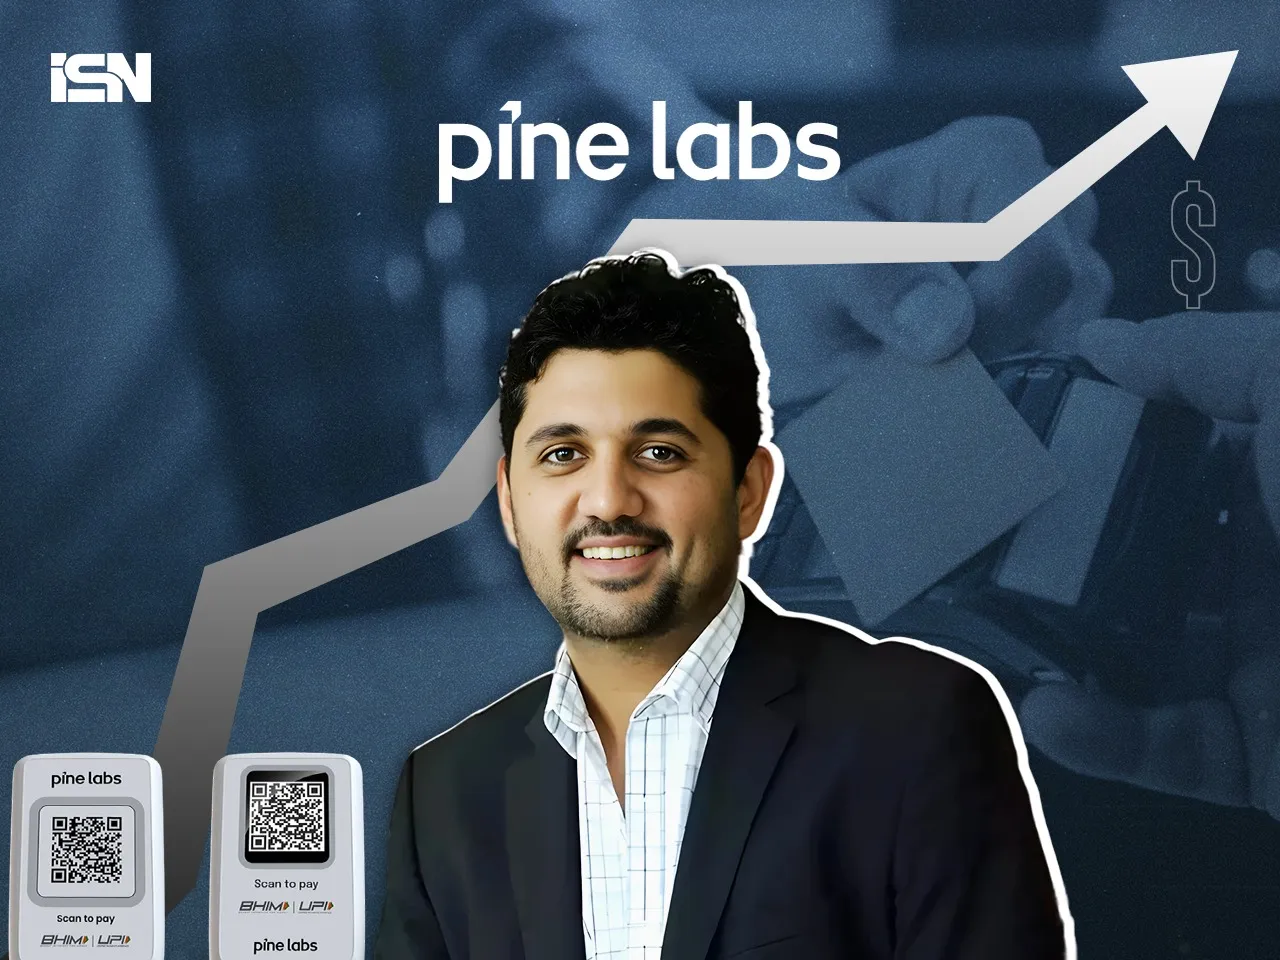 Baron Funds and Invesco hikes Pine Labs’ valuation